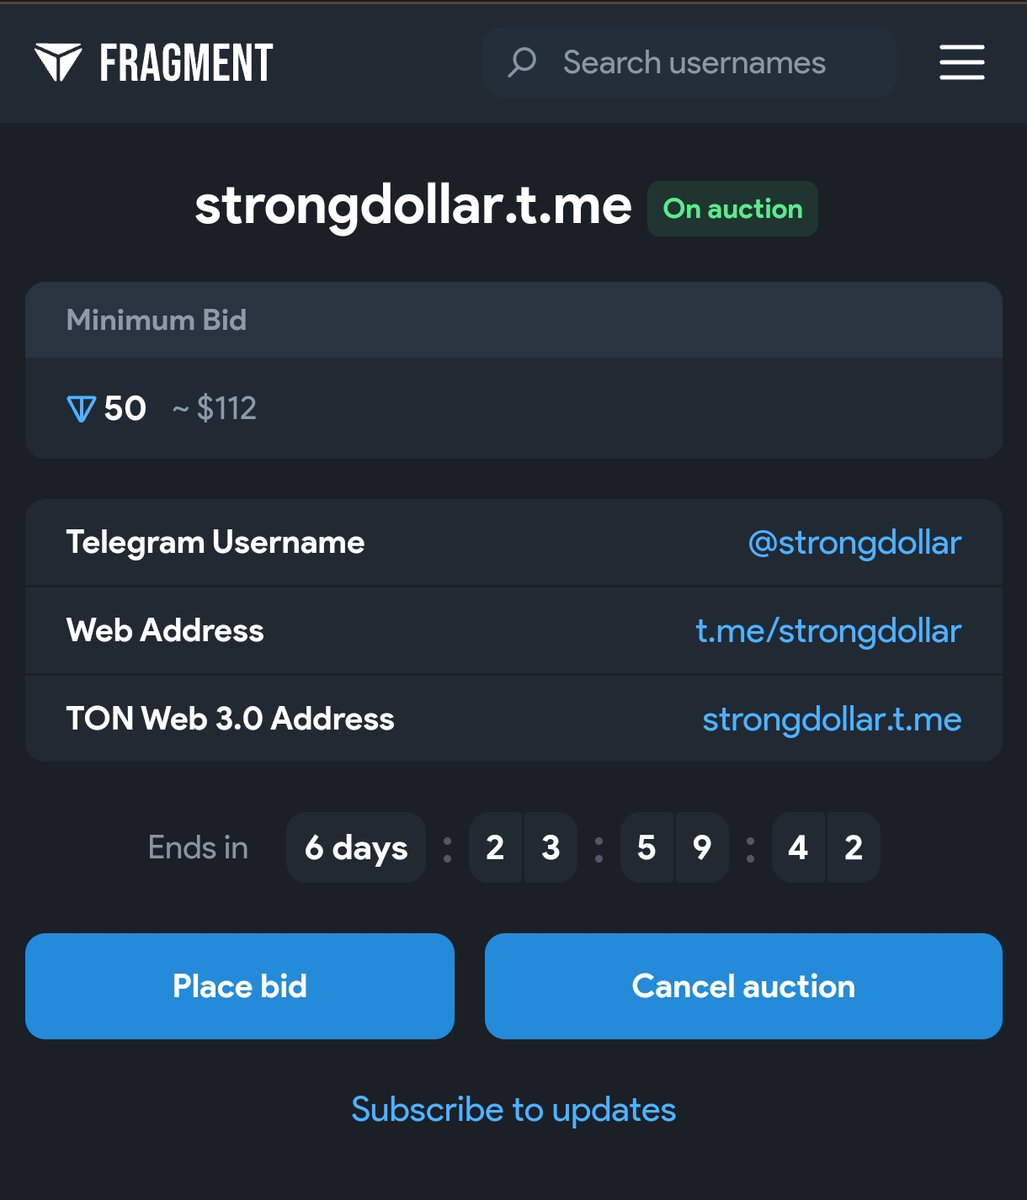 Lets check if $ is still the most powerfull cash?
fragment.com/username/stron…

Buy strong$ on fragment
#Telegram #ton #fragment #nft #username #Crypto #Dollar #CurrencyWatchlist #tonkeeper